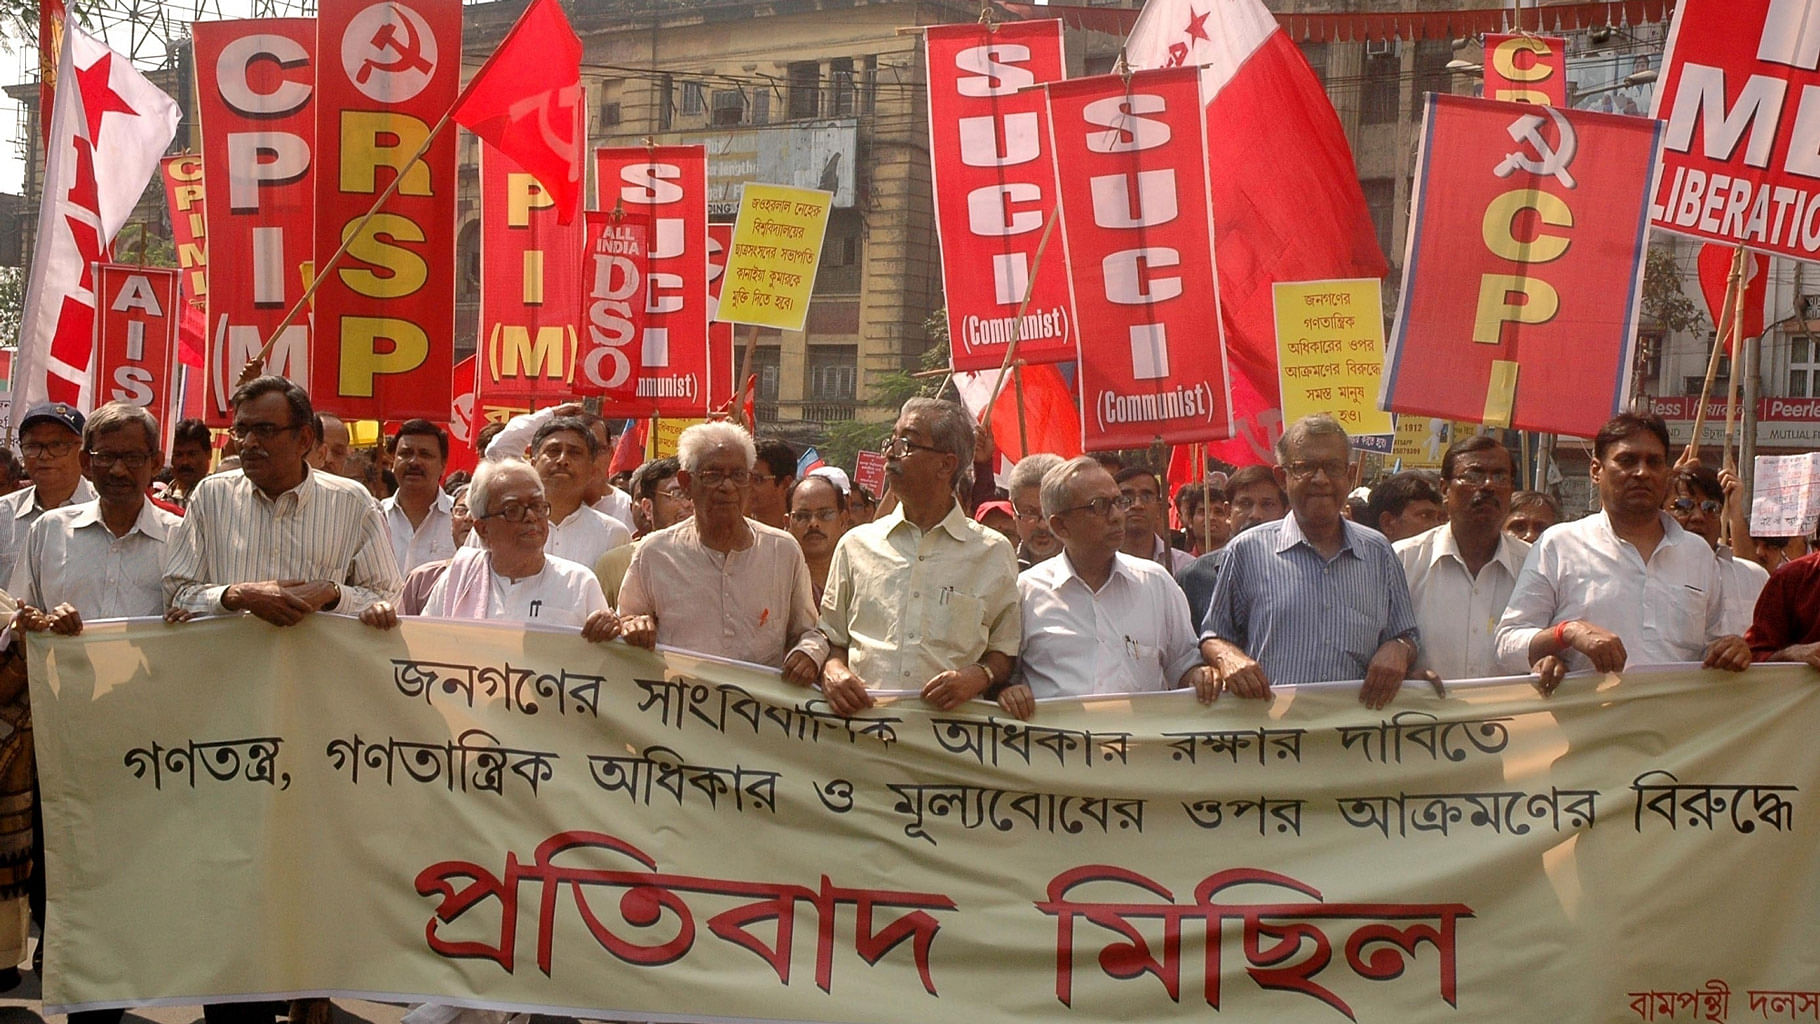 A Left-led protest in Kolkata on 21 February 2016. Image used for representation only.